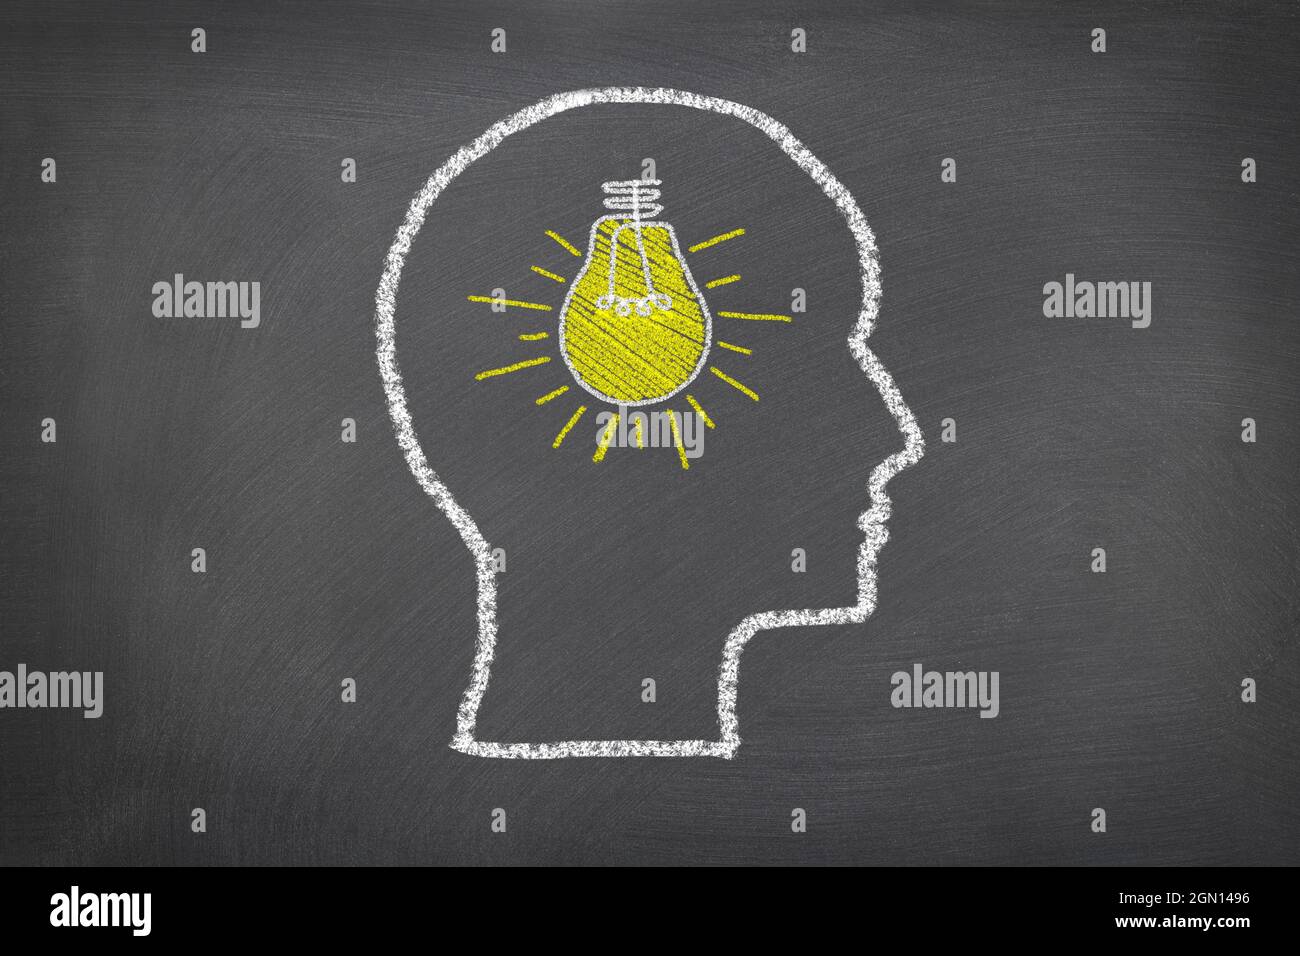 A chalk sketch on a blackboard of a human head and lightbulb that represents thoughts and ideas, for use as any science theme or consideration of how Stock Photo